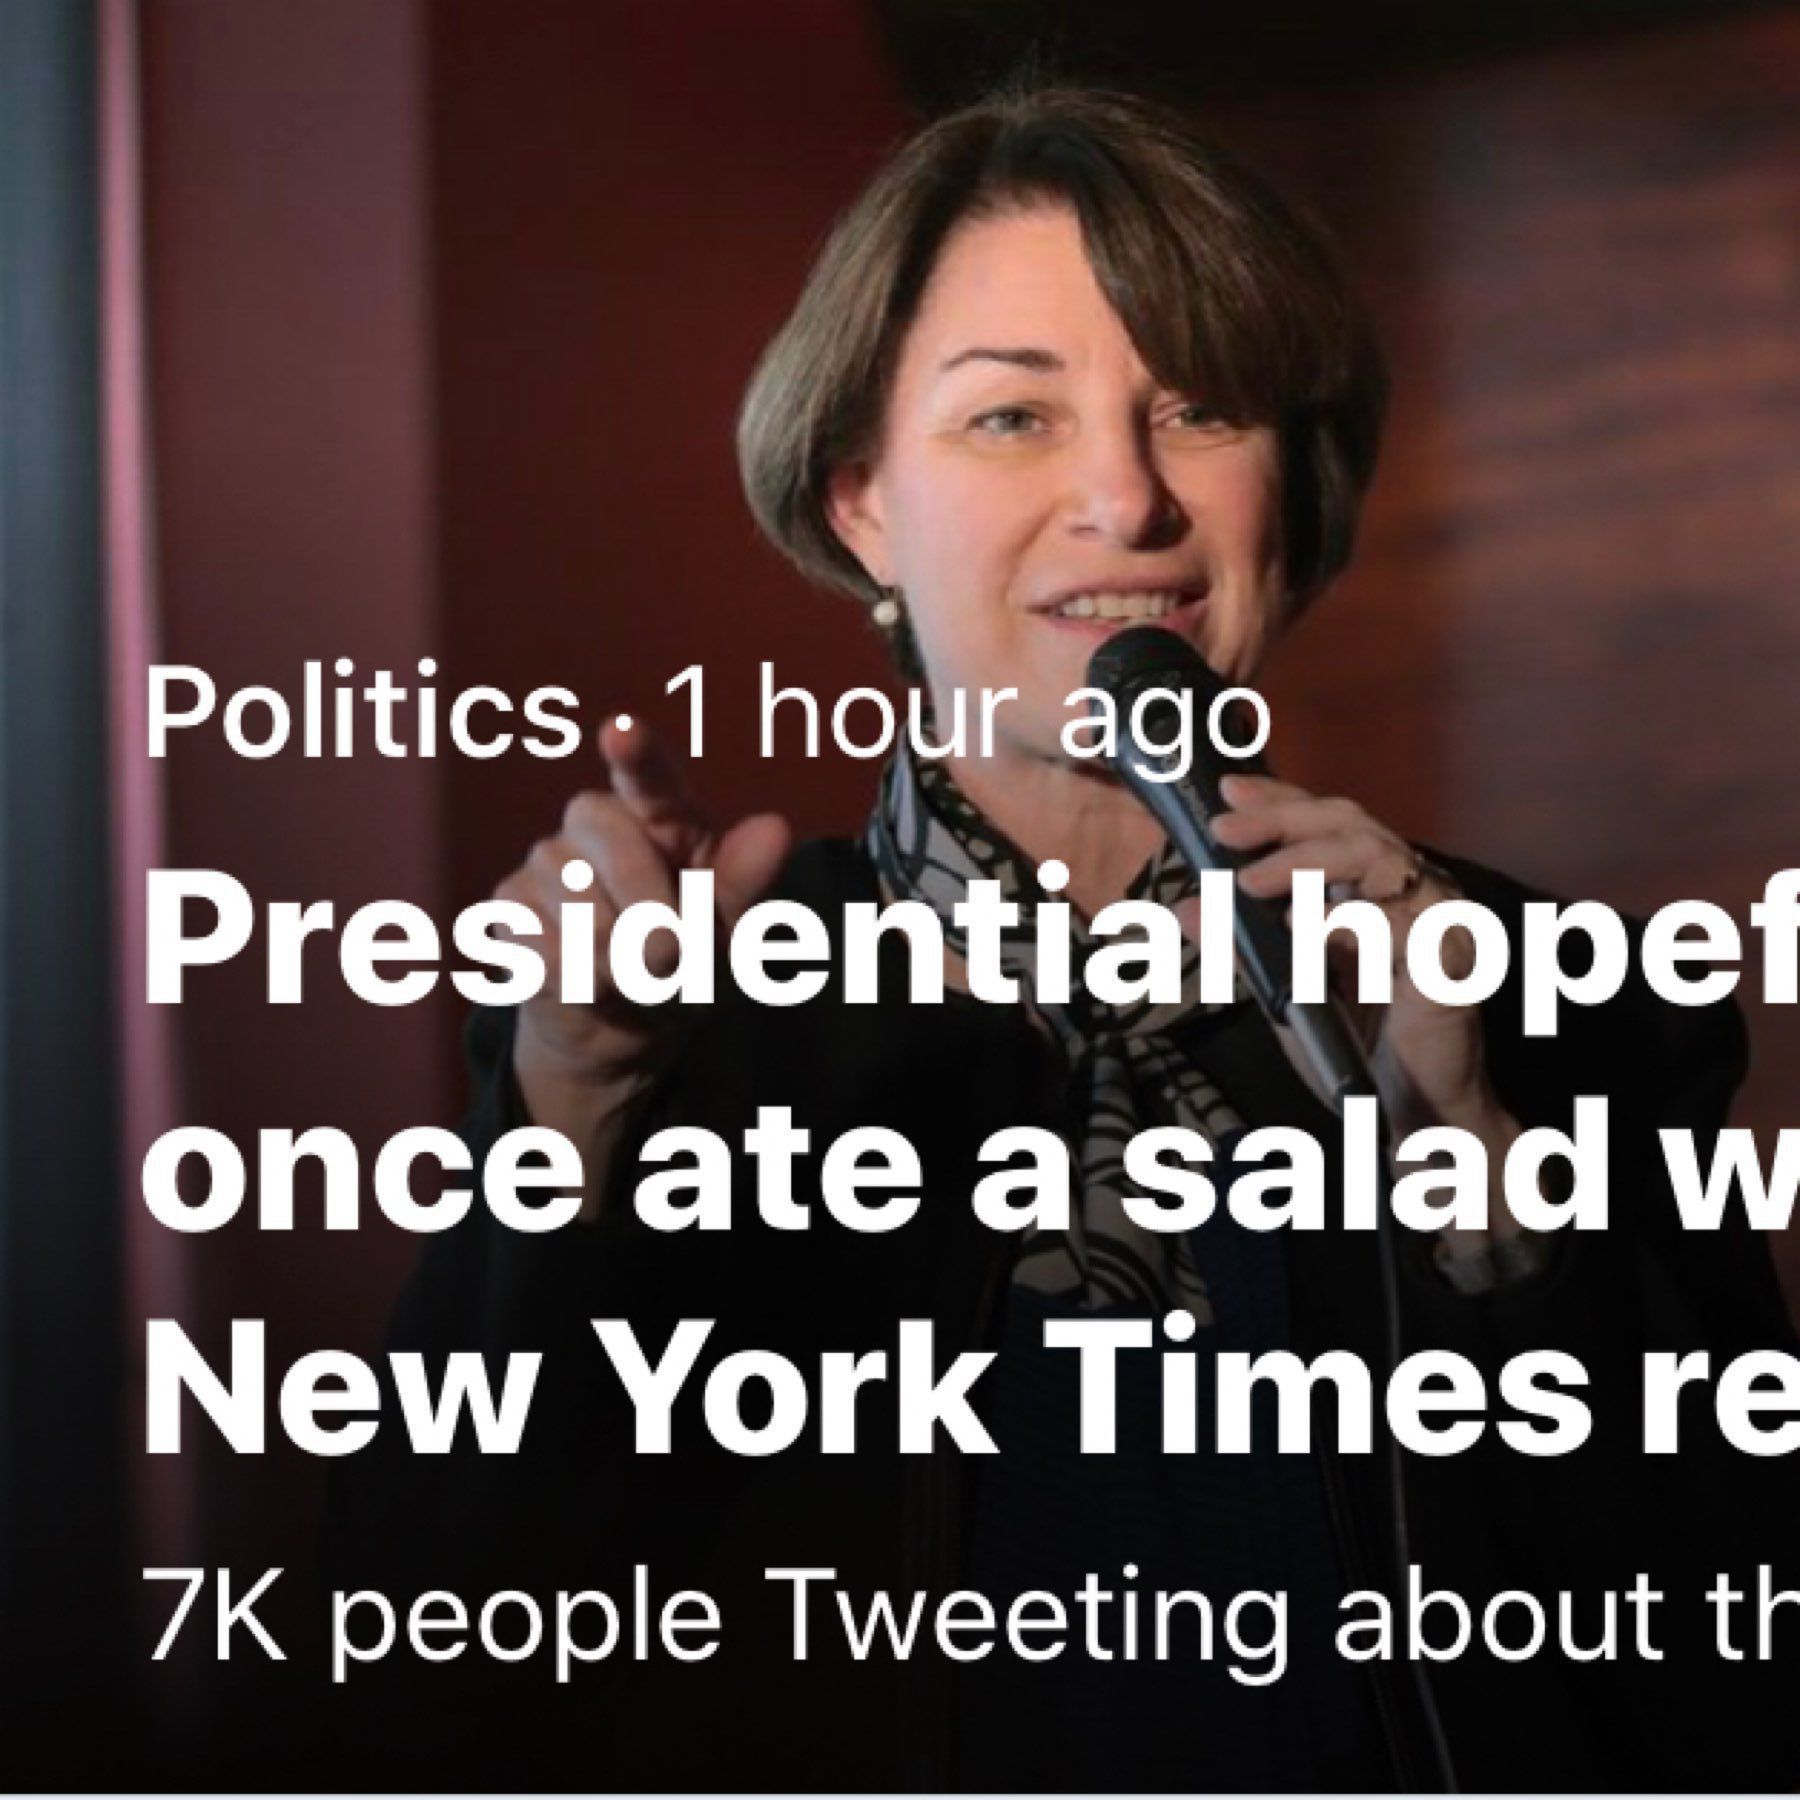 Screenshot of New York Times headline “Presidential hopeful Klobuchar once ate a salad with her comb”